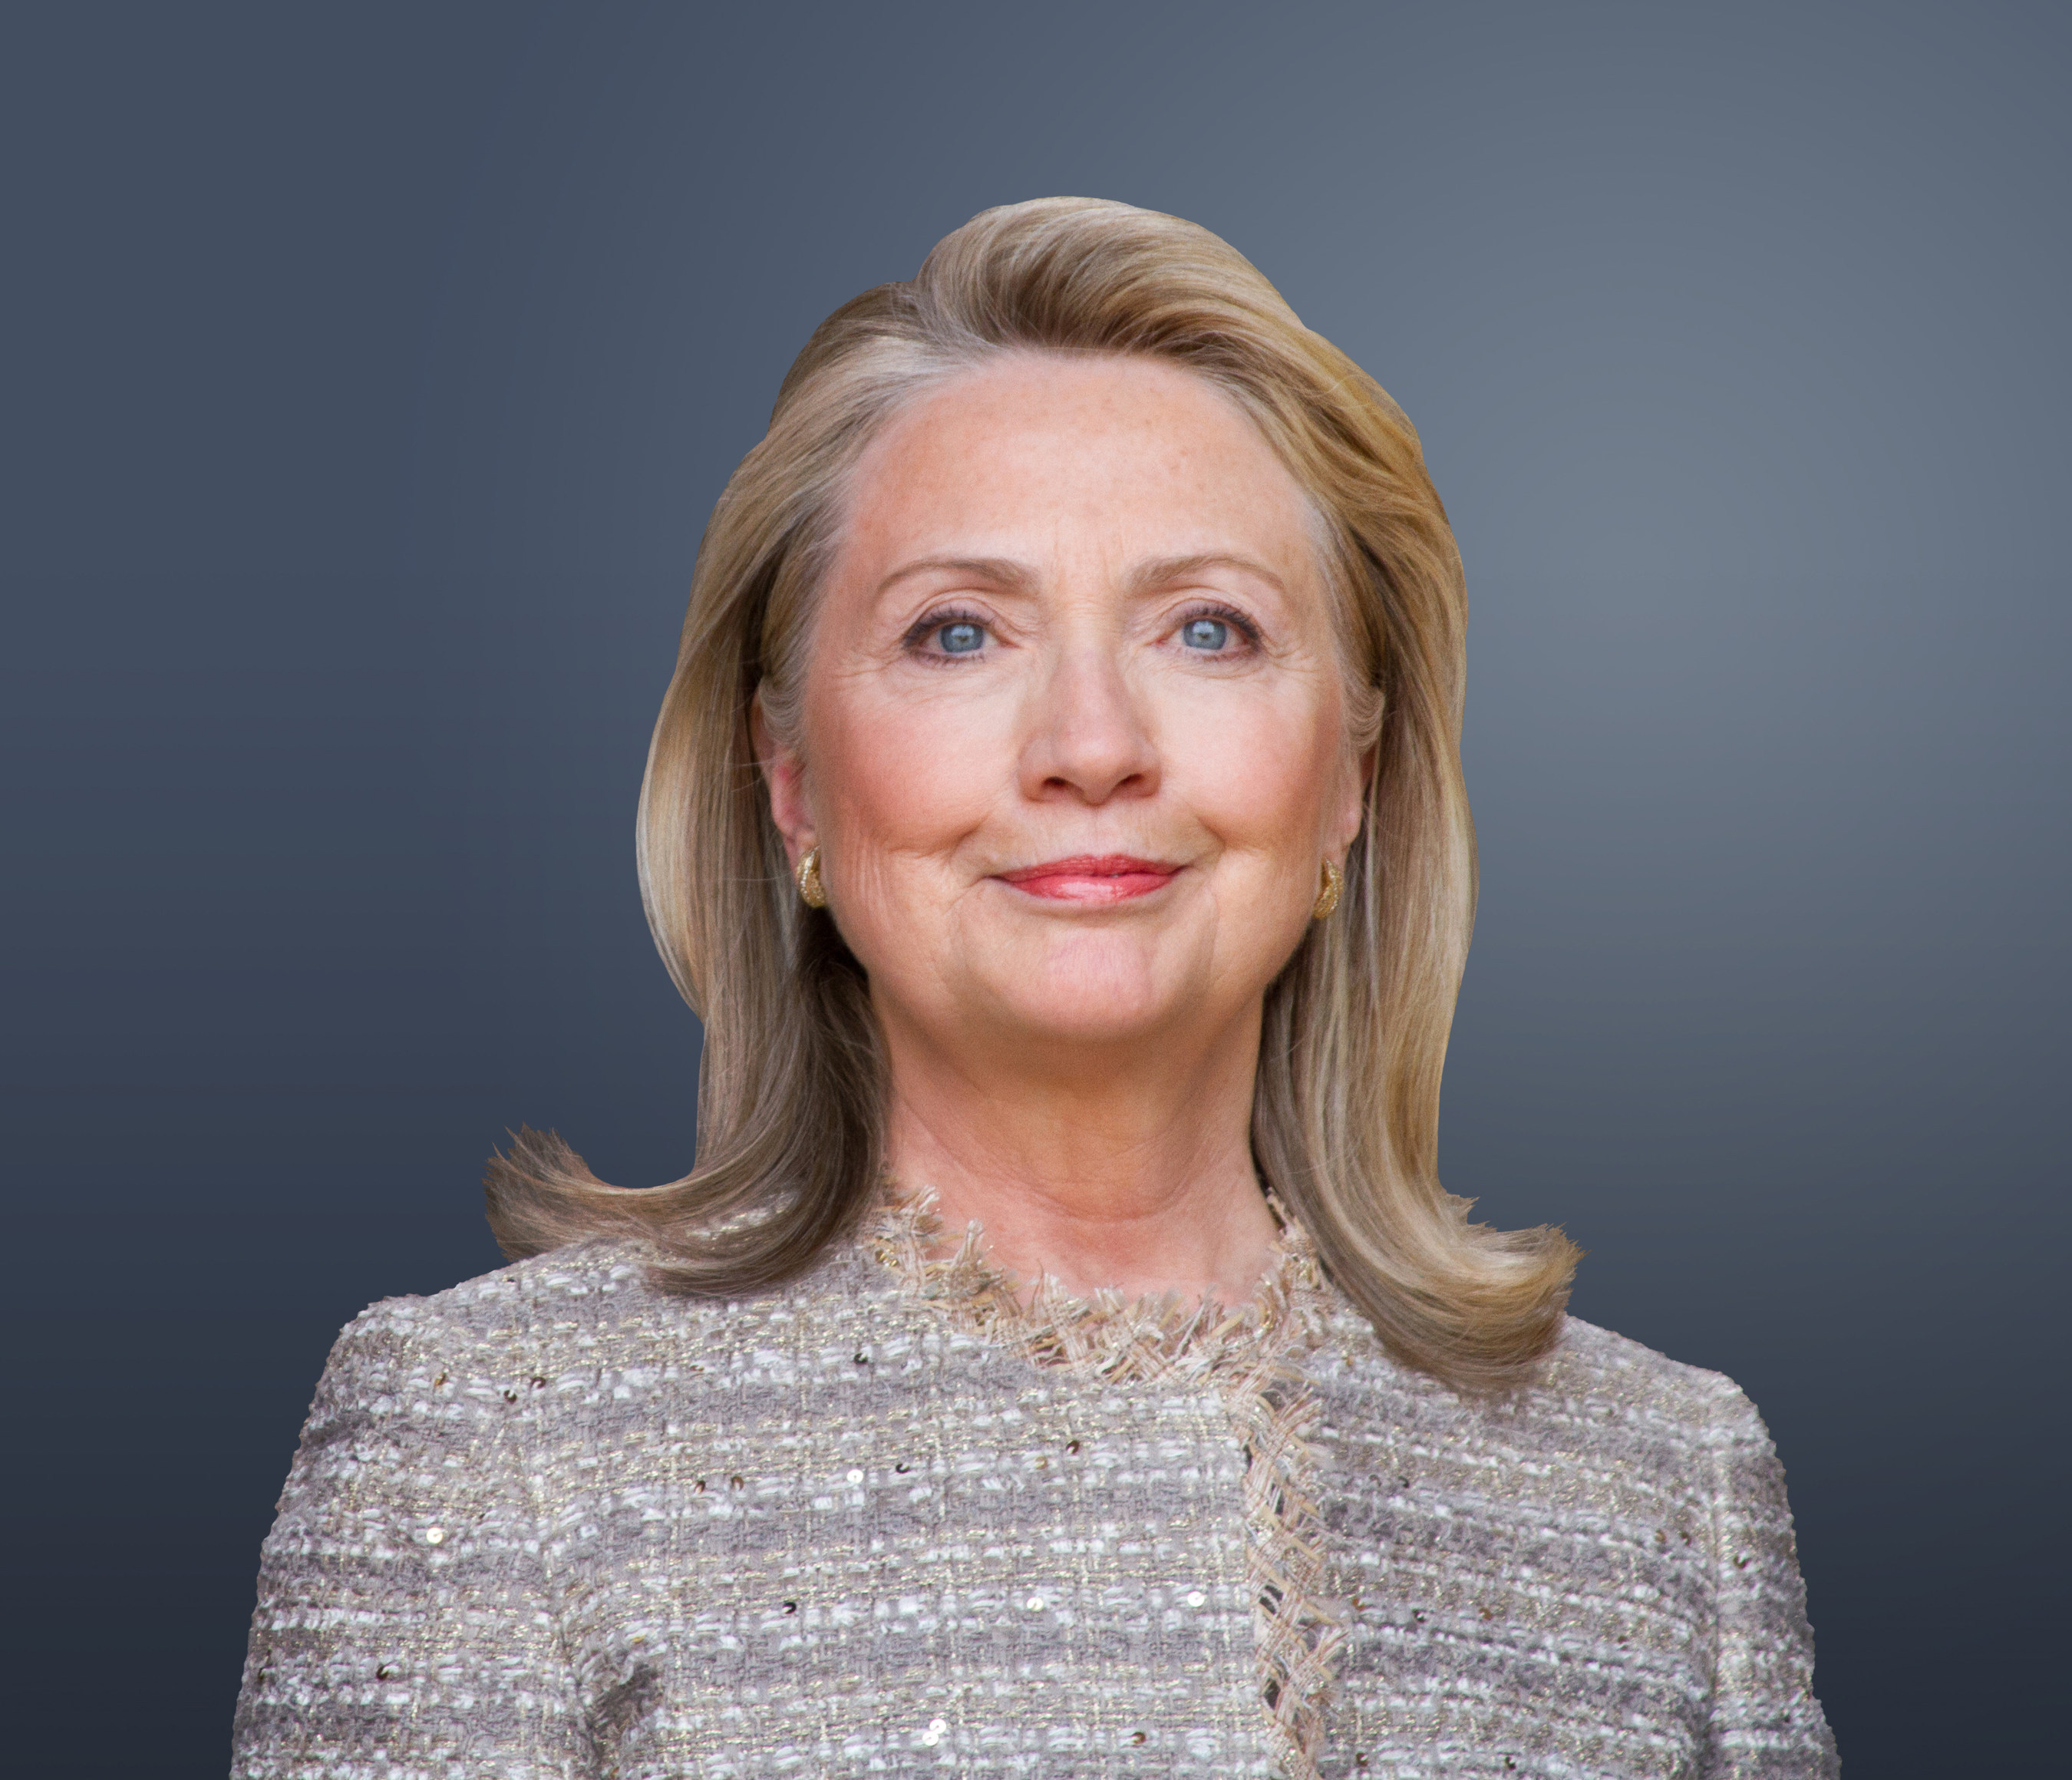 Hillary Rodham Clinton to deliver keynote address at inaugural Watermark Conference for Women on February 24, 2015 in Santa Clara, CA.